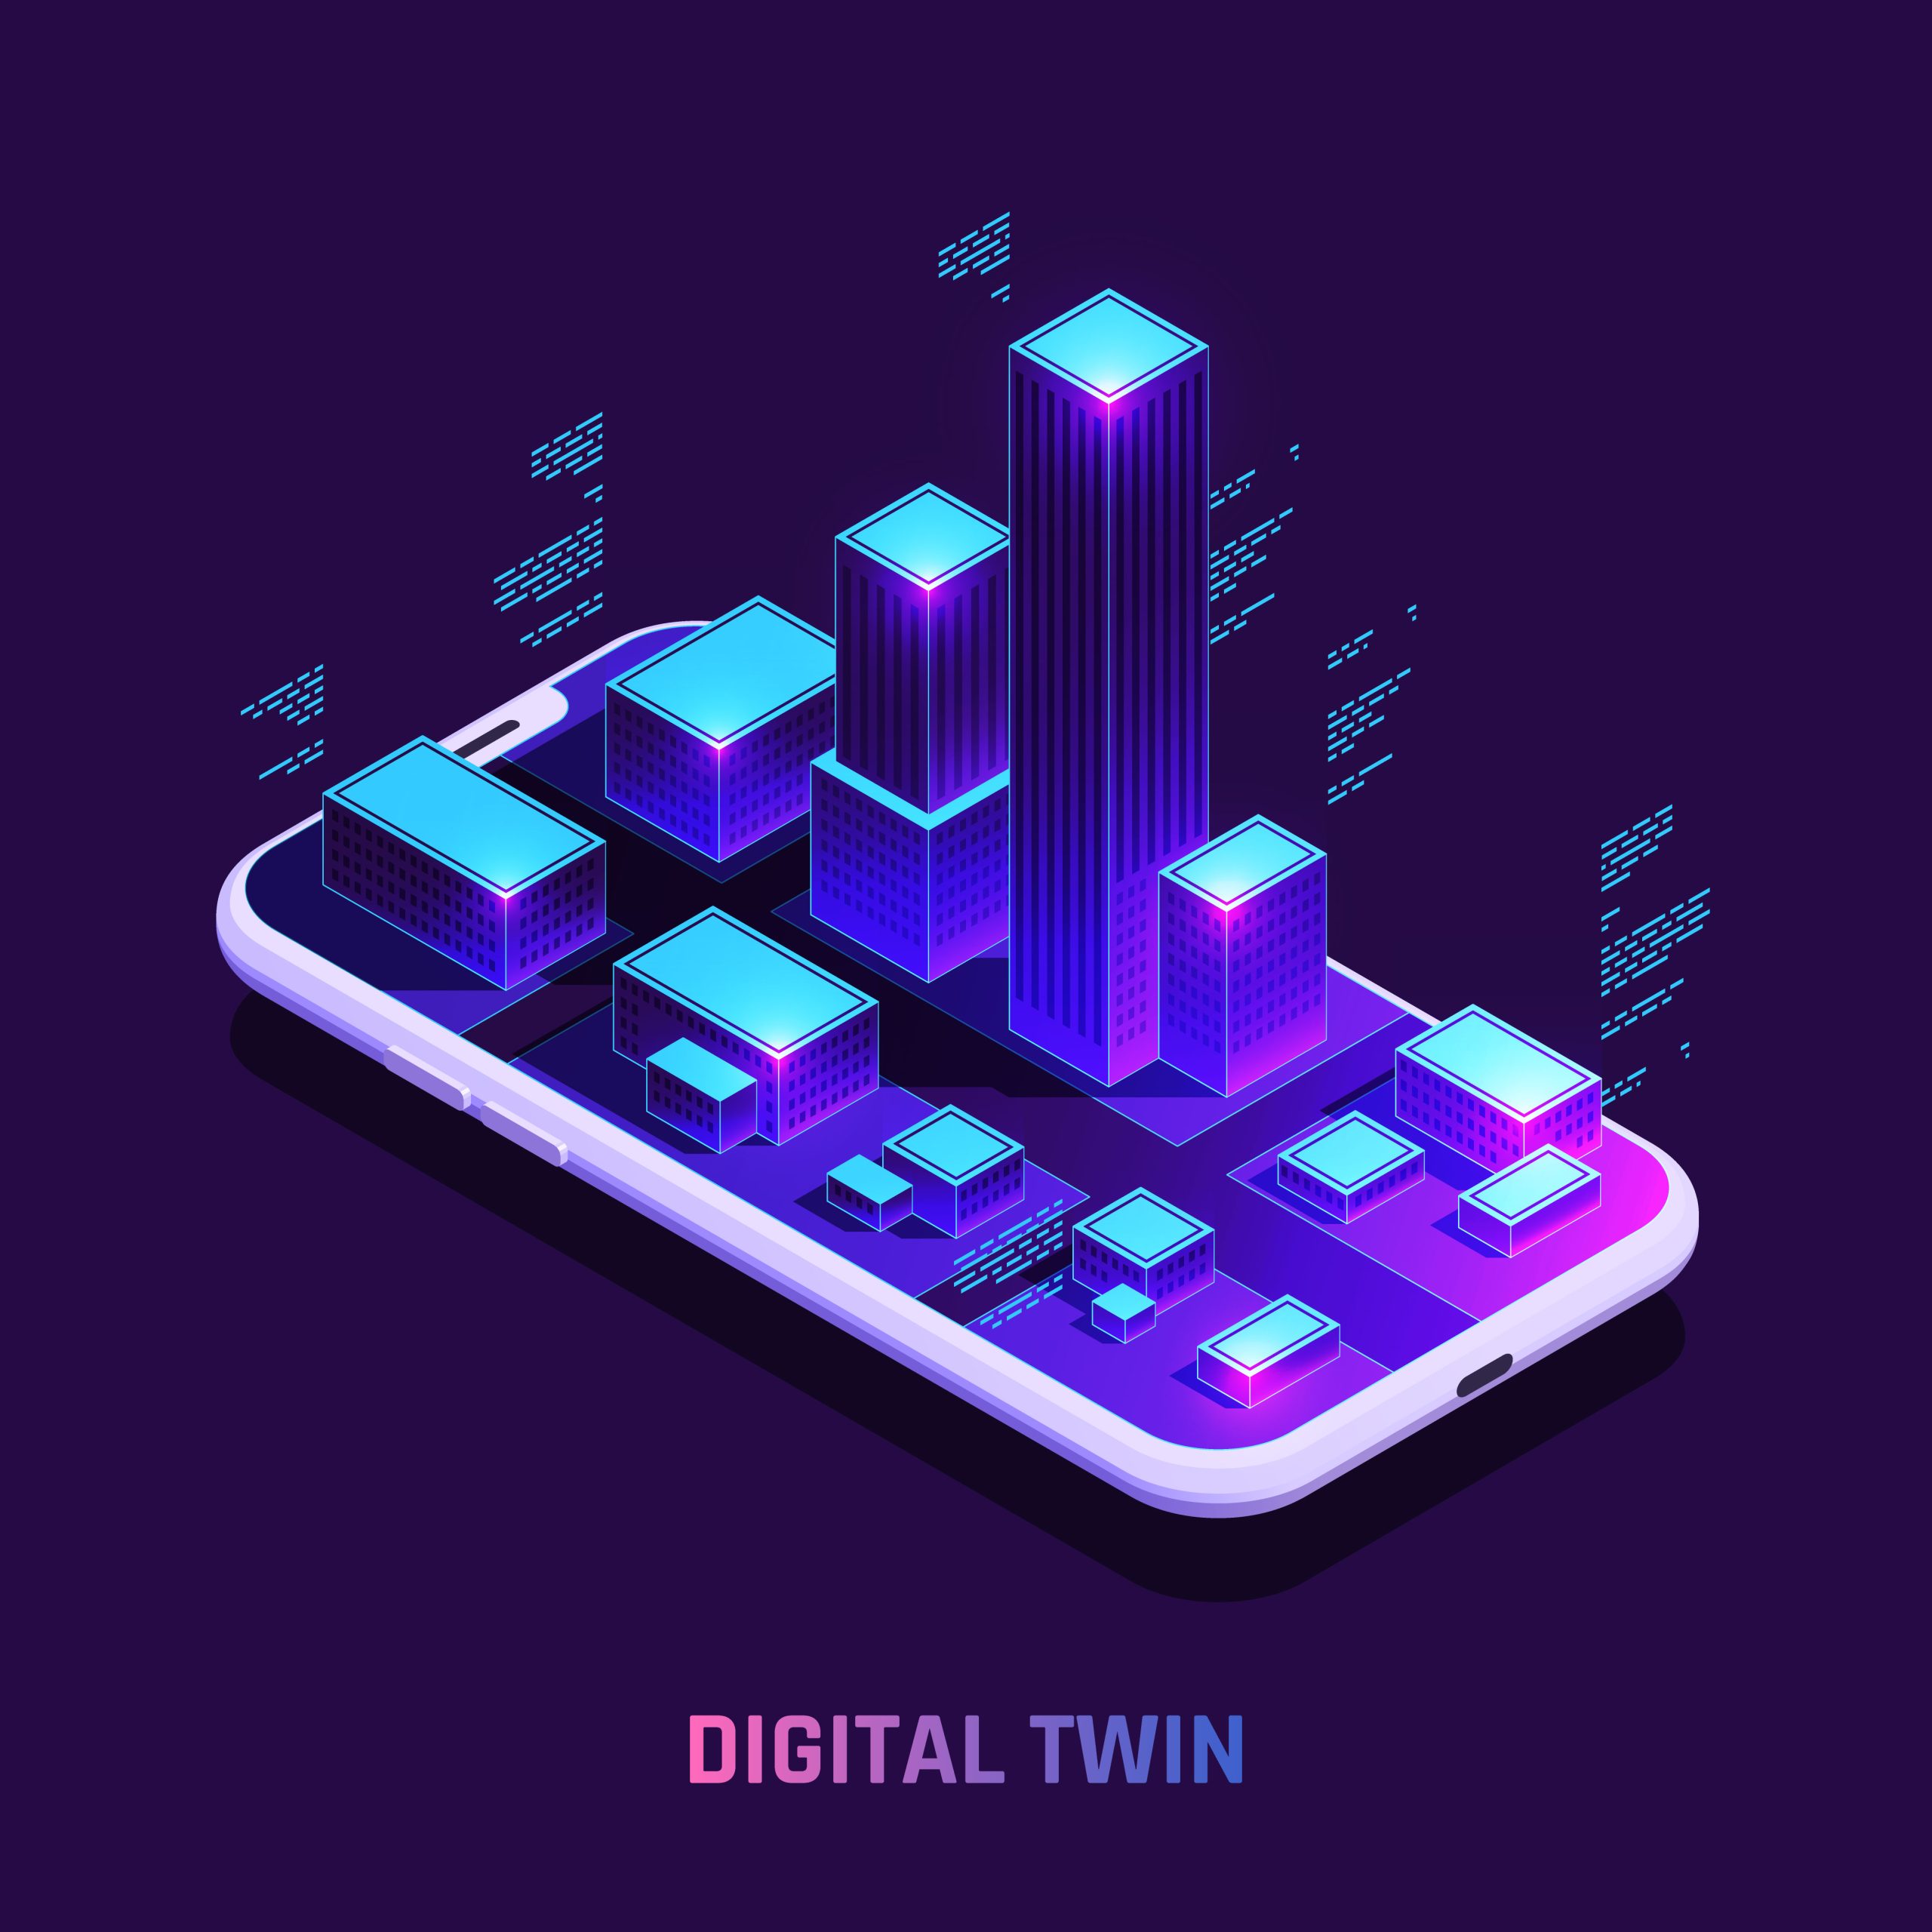 What Is Digital Twin Technology and Why We Need It